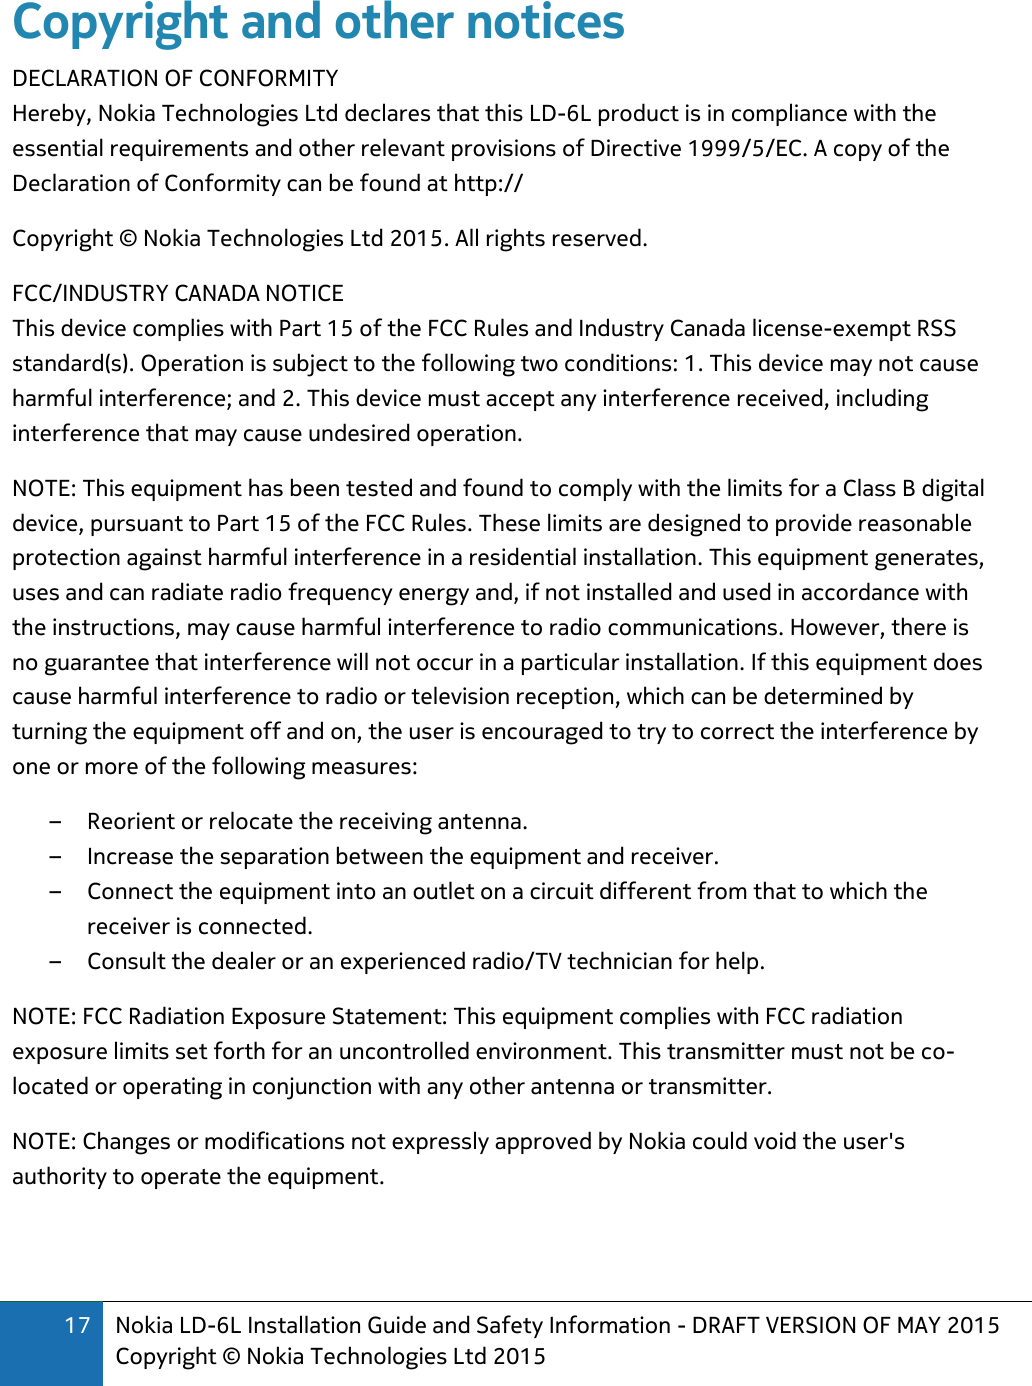 17 Nokia LD-6L Installation Guide and Safety Information - DRAFT VERSION OF MAY 2015 Copyright © Nokia Technologies Ltd 2015  Copyright and other notices DECLARATION OF CONFORMITY Hereby, Nokia Technologies Ltd declares that this LD-6L product is in compliance with the essential requirements and other relevant provisions of Directive 1999/5/EC. A copy of the Declaration of Conformity can be found at http:// Copyright © Nokia Technologies Ltd 2015. All rights reserved. FCC/INDUSTRY CANADA NOTICE This device complies with Part 15 of the FCC Rules and Industry Canada license-exempt RSS standard(s). Operation is subject to the following two conditions: 1. This device may not cause harmful interference; and 2. This device must accept any interference received, including interference that may cause undesired operation.  NOTE: This equipment has been tested and found to comply with the limits for a Class B digital device, pursuant to Part 15 of the FCC Rules. These limits are designed to provide reasonable protection against harmful interference in a residential installation. This equipment generates, uses and can radiate radio frequency energy and, if not installed and used in accordance with the instructions, may cause harmful interference to radio communications. However, there is no guarantee that interference will not occur in a particular installation. If this equipment does cause harmful interference to radio or television reception, which can be determined by turning the equipment off and on, the user is encouraged to try to correct the interference by one or more of the following measures:  – Reorient or relocate the receiving antenna.  – Increase the separation between the equipment and receiver.  – Connect the equipment into an outlet on a circuit different from that to which the receiver is connected.  – Consult the dealer or an experienced radio/TV technician for help.  NOTE: FCC Radiation Exposure Statement: This equipment complies with FCC radiation exposure limits set forth for an uncontrolled environment. This transmitter must not be co-located or operating in conjunction with any other antenna or transmitter.  NOTE: Changes or modifications not expressly approved by Nokia could void the user&apos;s authority to operate the equipment. 